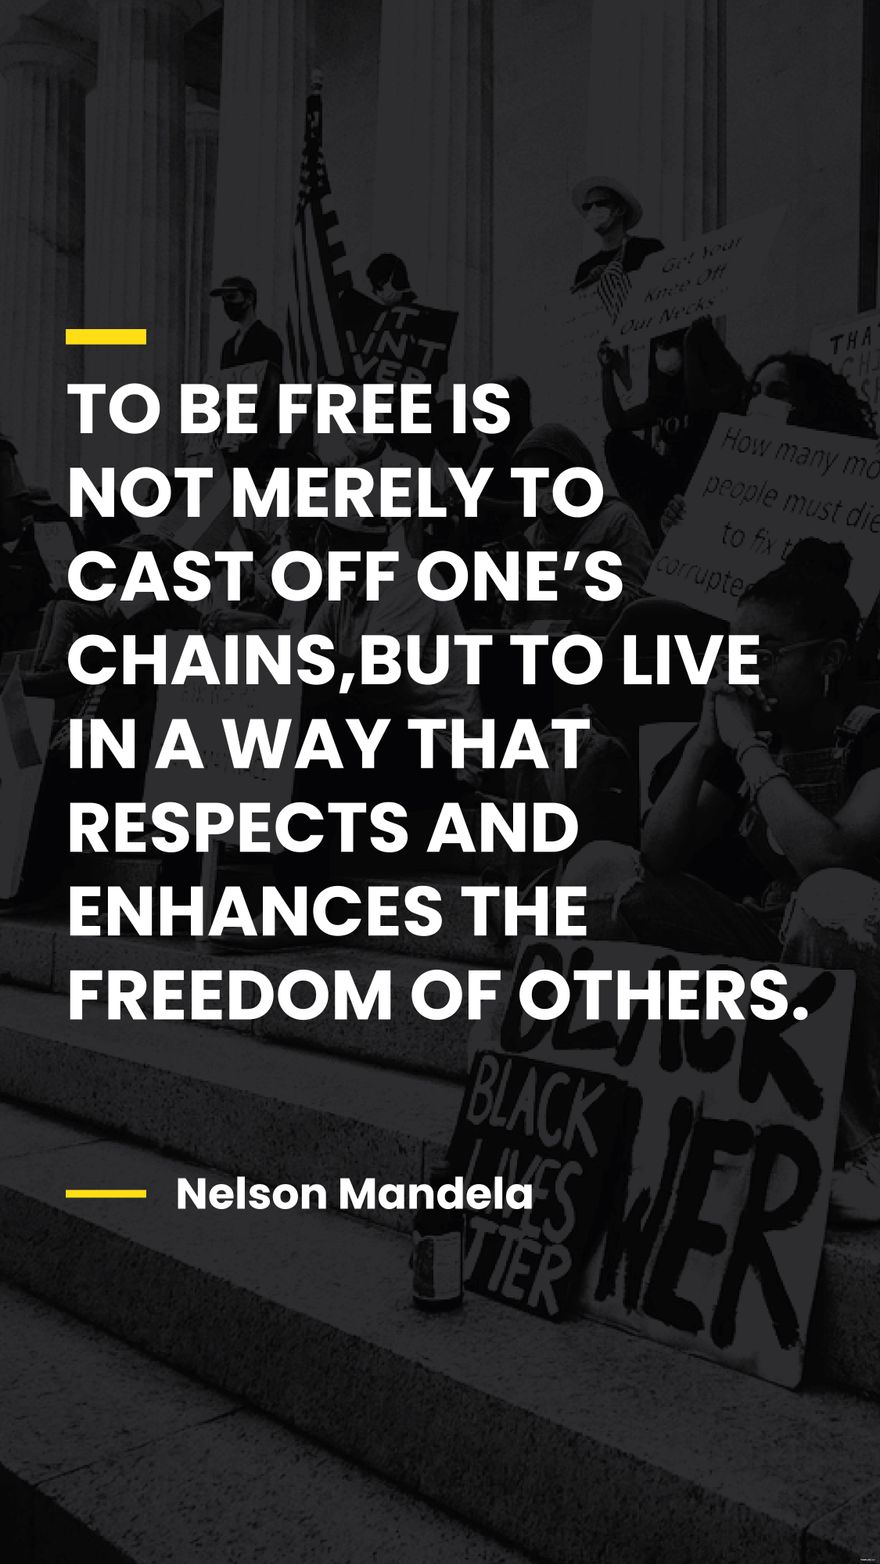 Free Nelson Mandela - To be is not merely to cast off one’s chains, but to live in a way that respects and enhances the freedom of others. in JPG